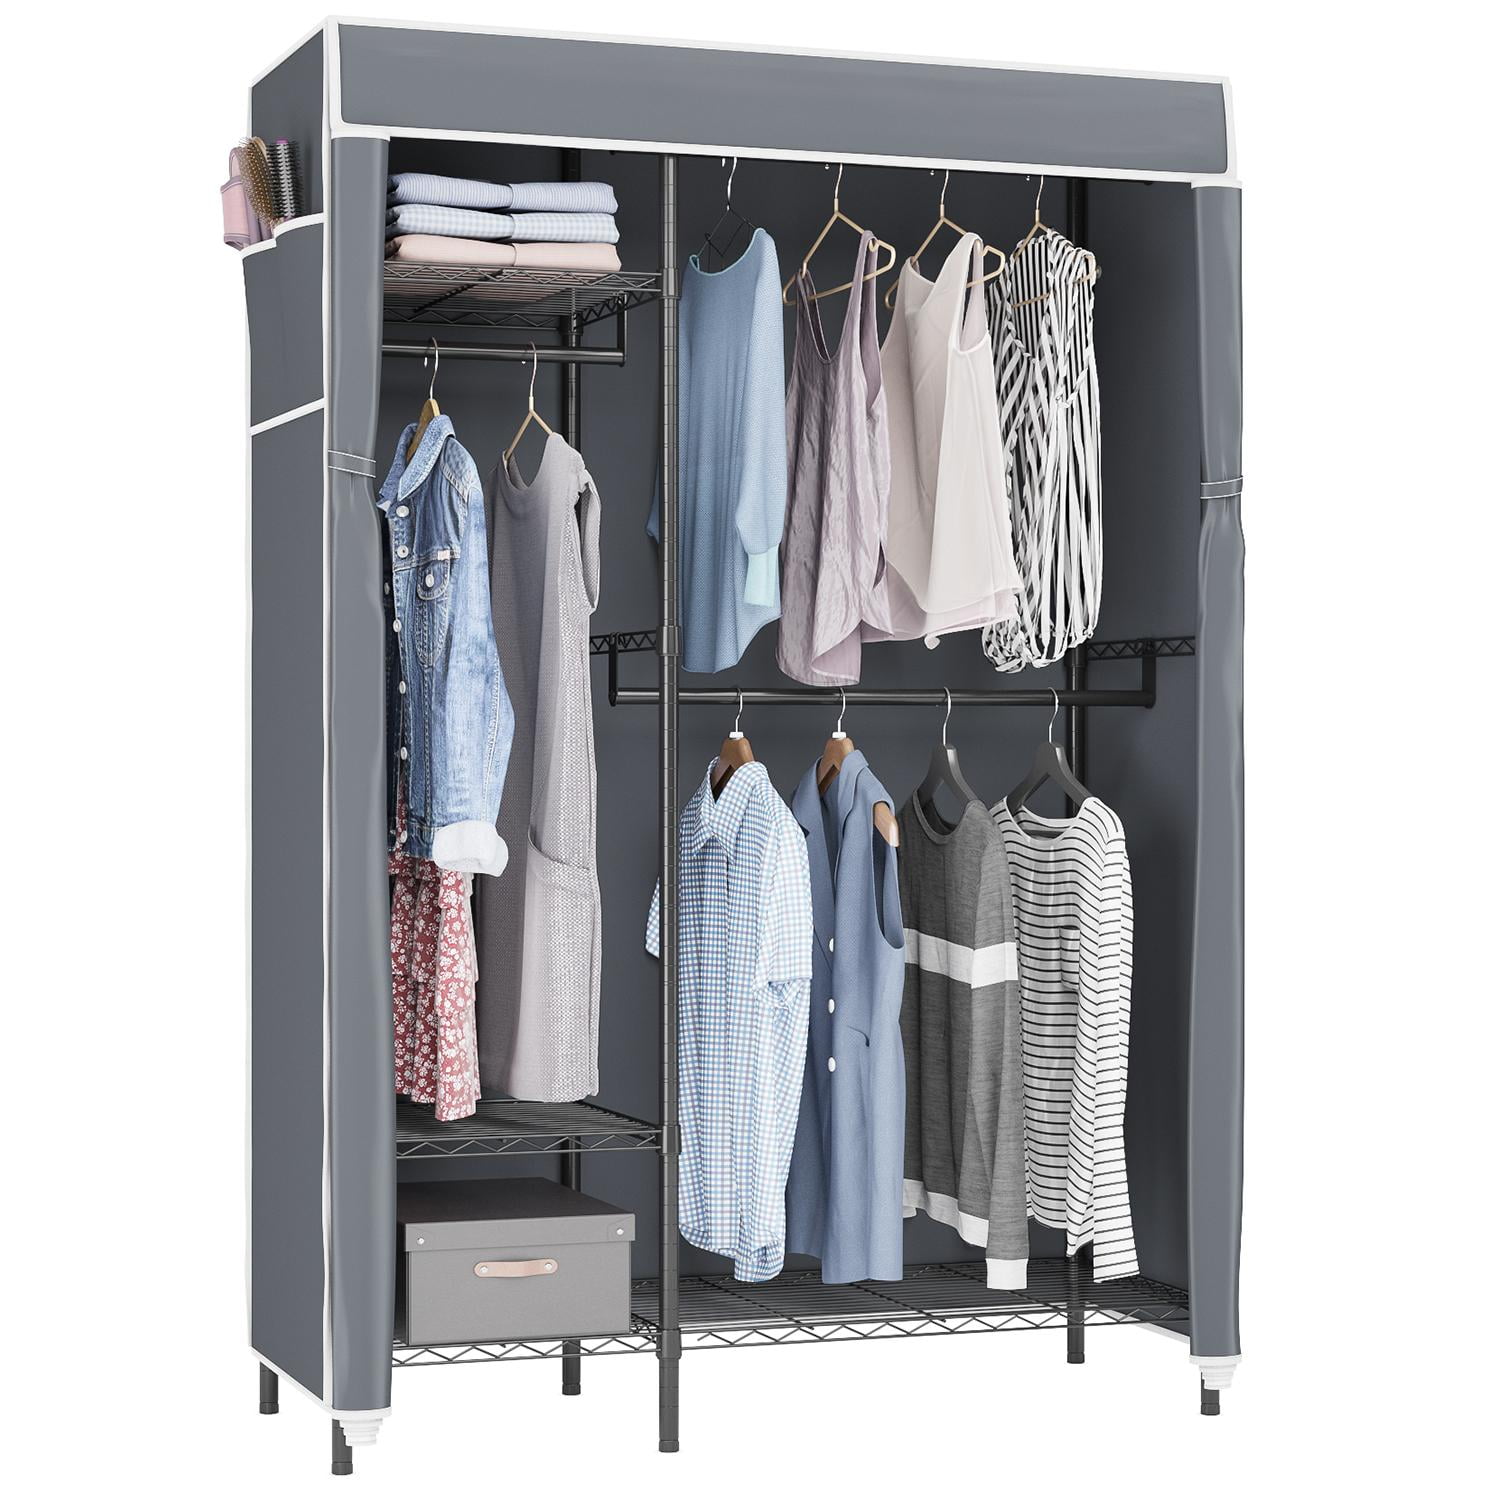 VIPEK V2C Wire Garment Rack 4 Tiers with Gray Oxford Fabric Cover, Max ...